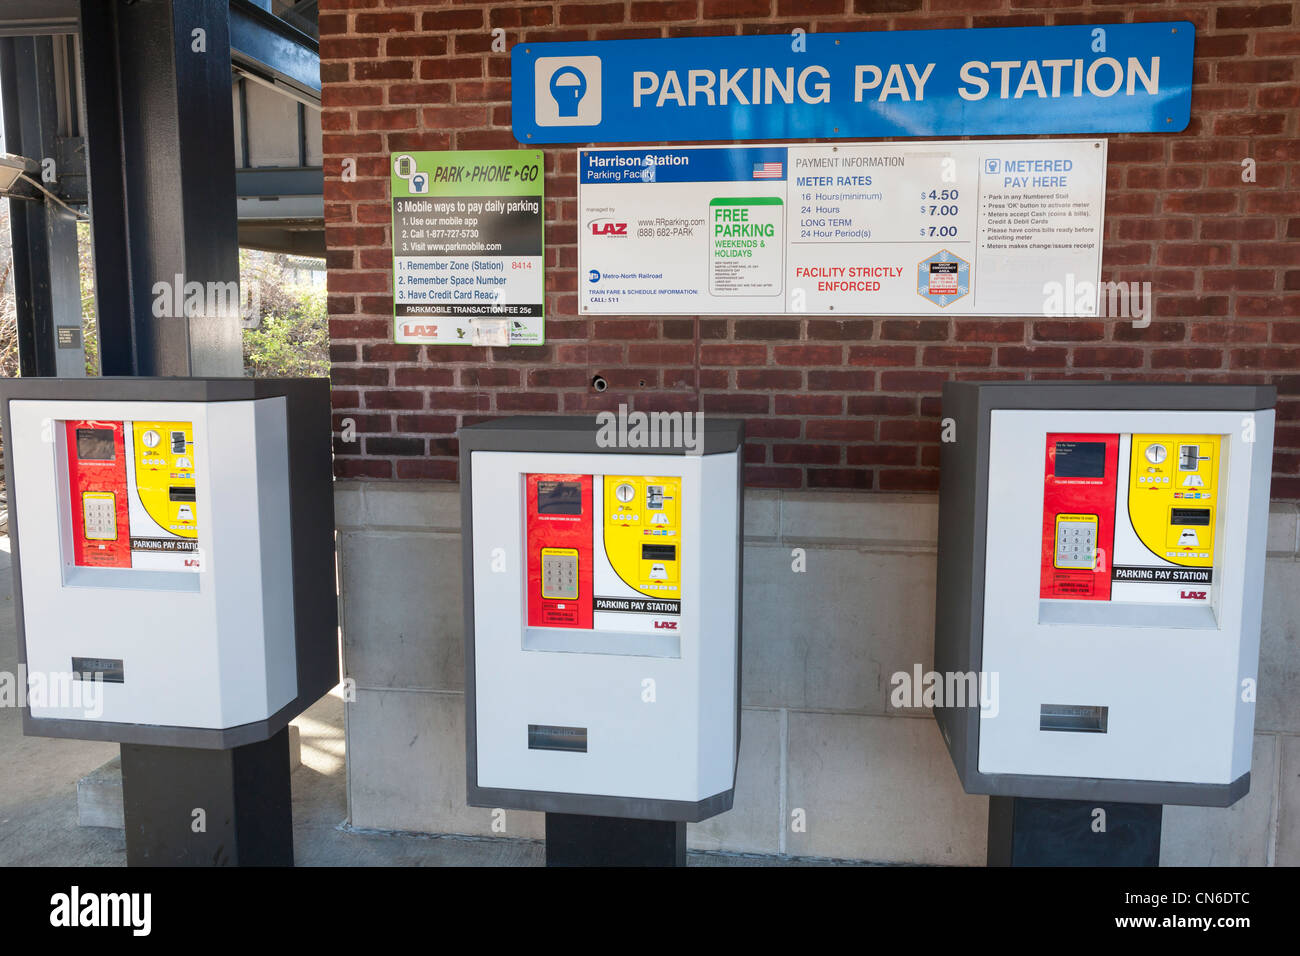 A pay station for the parking facility at the Metro-North train station in Harrison, New York Stock Photo